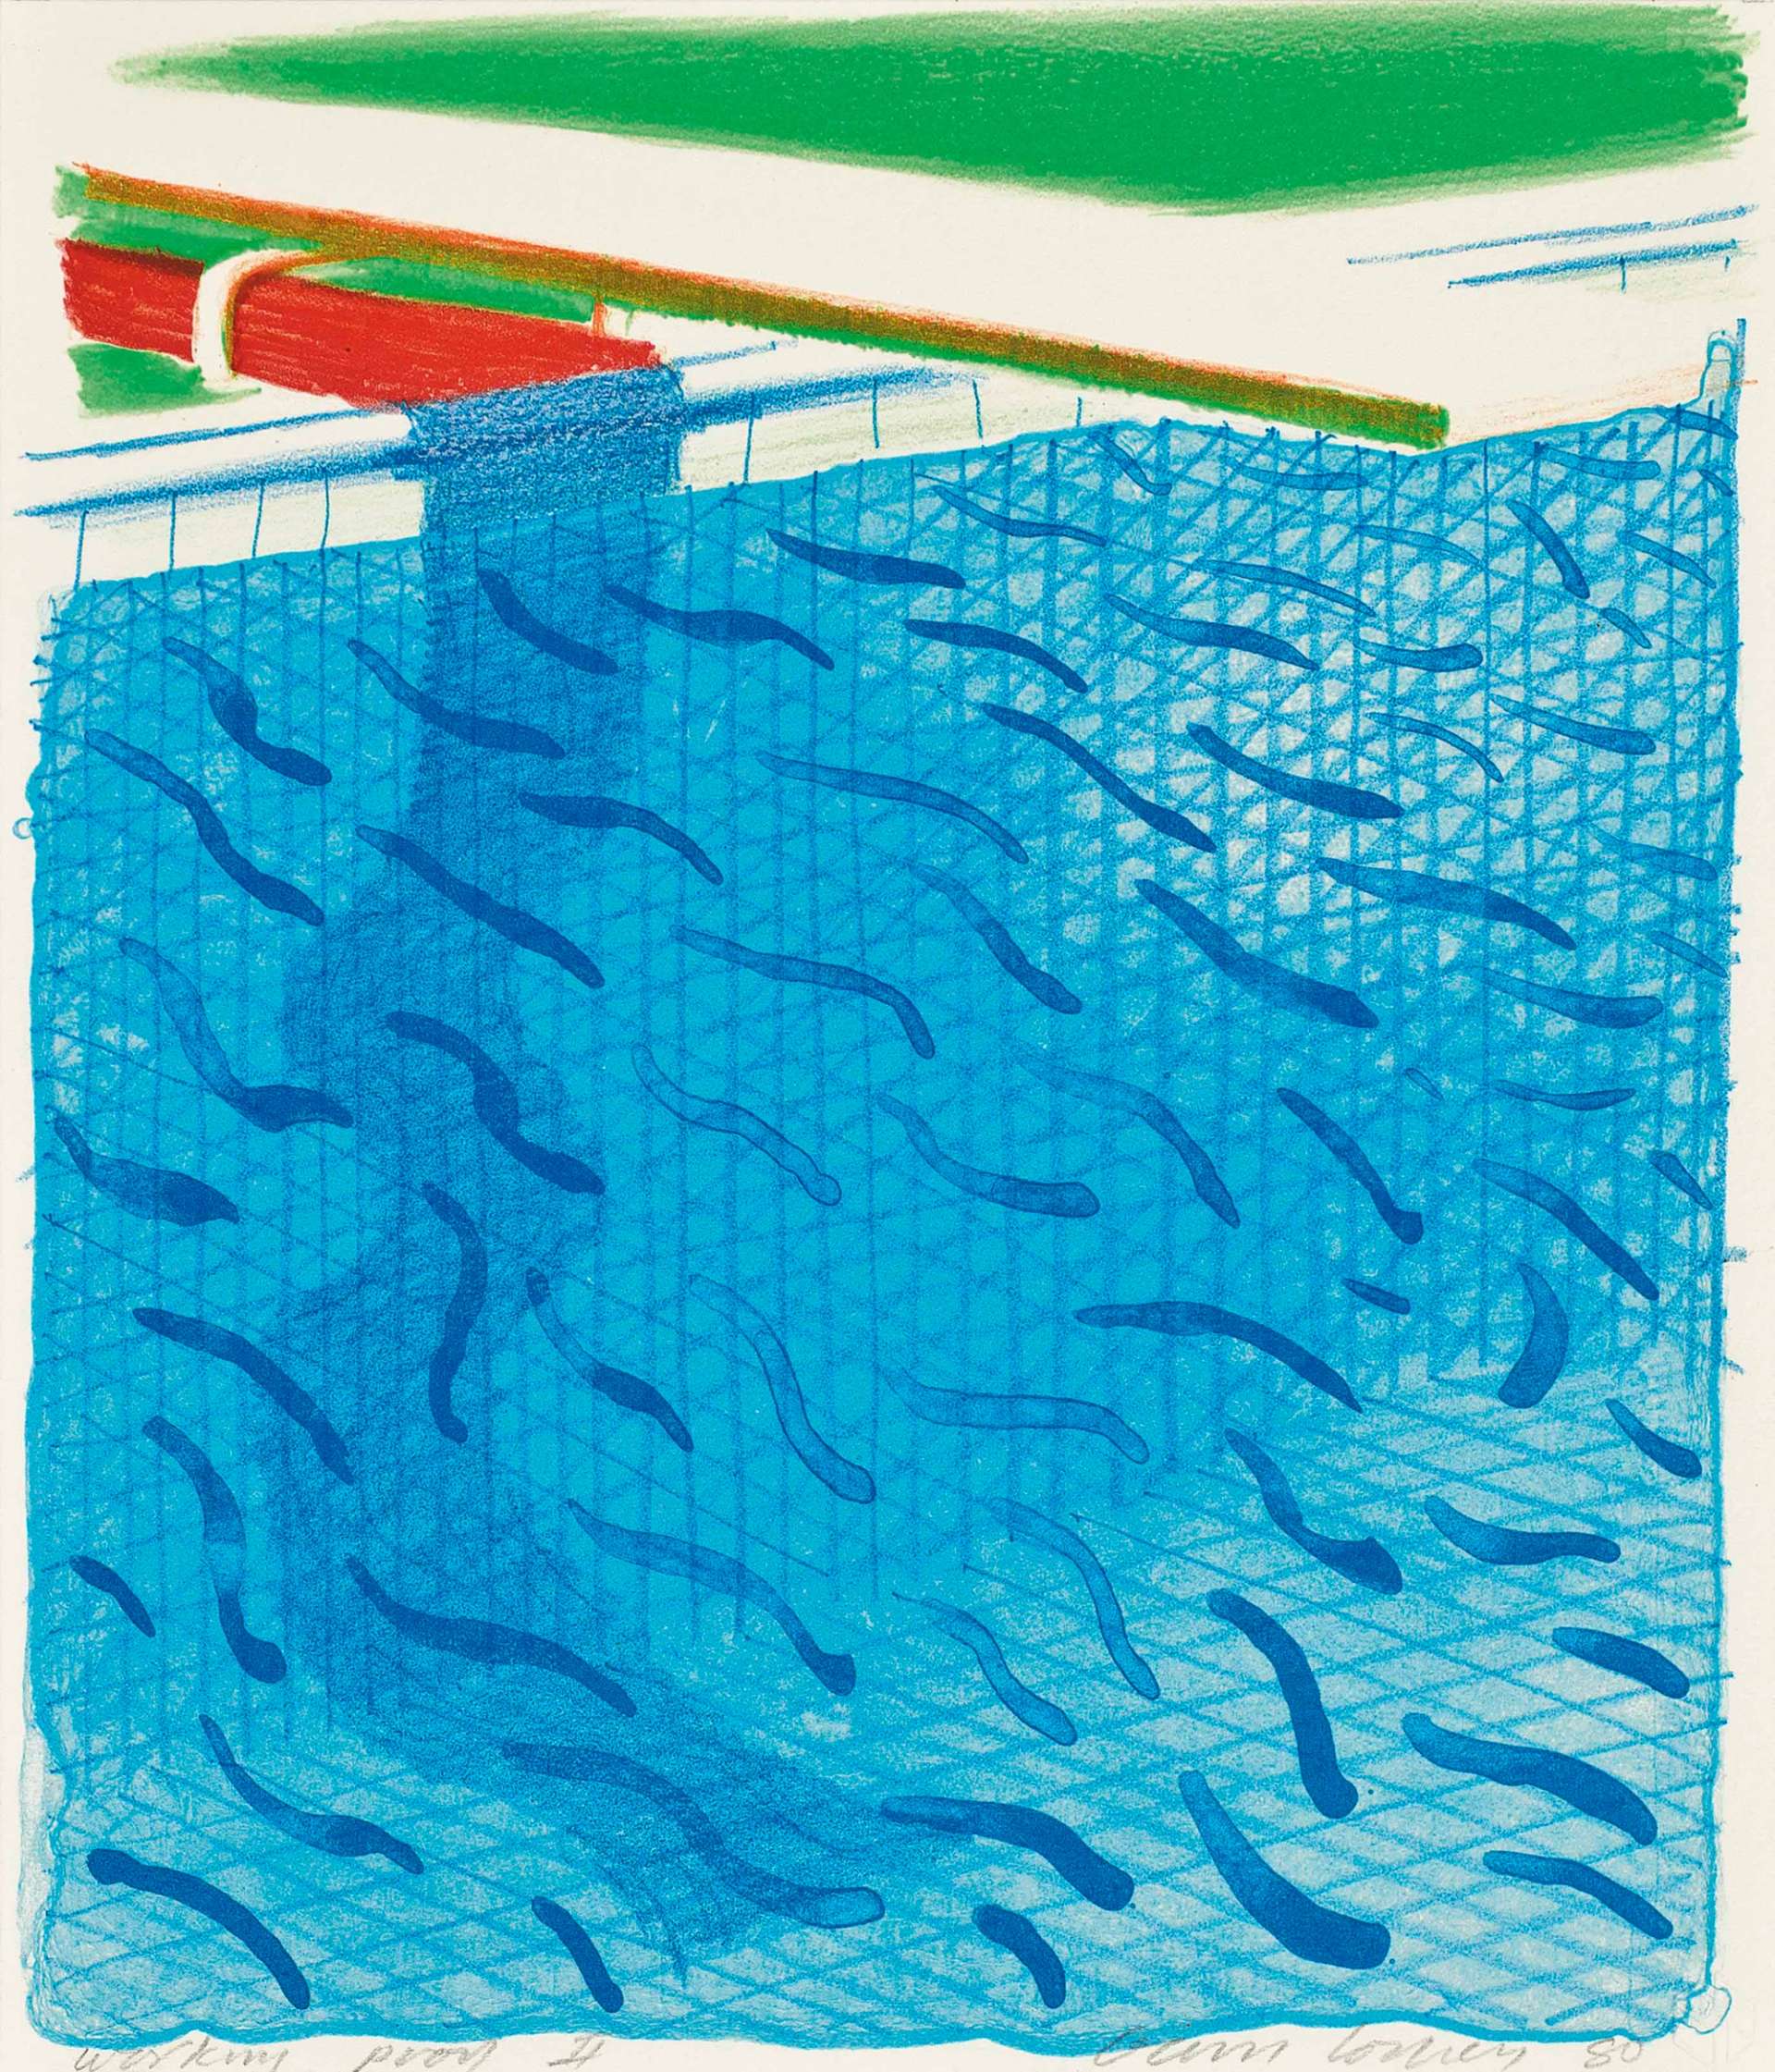 In this print, the water occupies almost the entire surface of the image, exhibiting simplicity of composition coupled with precise details and crisp linear outlines. Because Hockney experiments with diverse shades of the blue colour, the representation of water becomes complex and multidimensional. A square tile pattern pokes through the surface, revealing the depth of the swimming pool as well as the lustre surface of its bottom. 